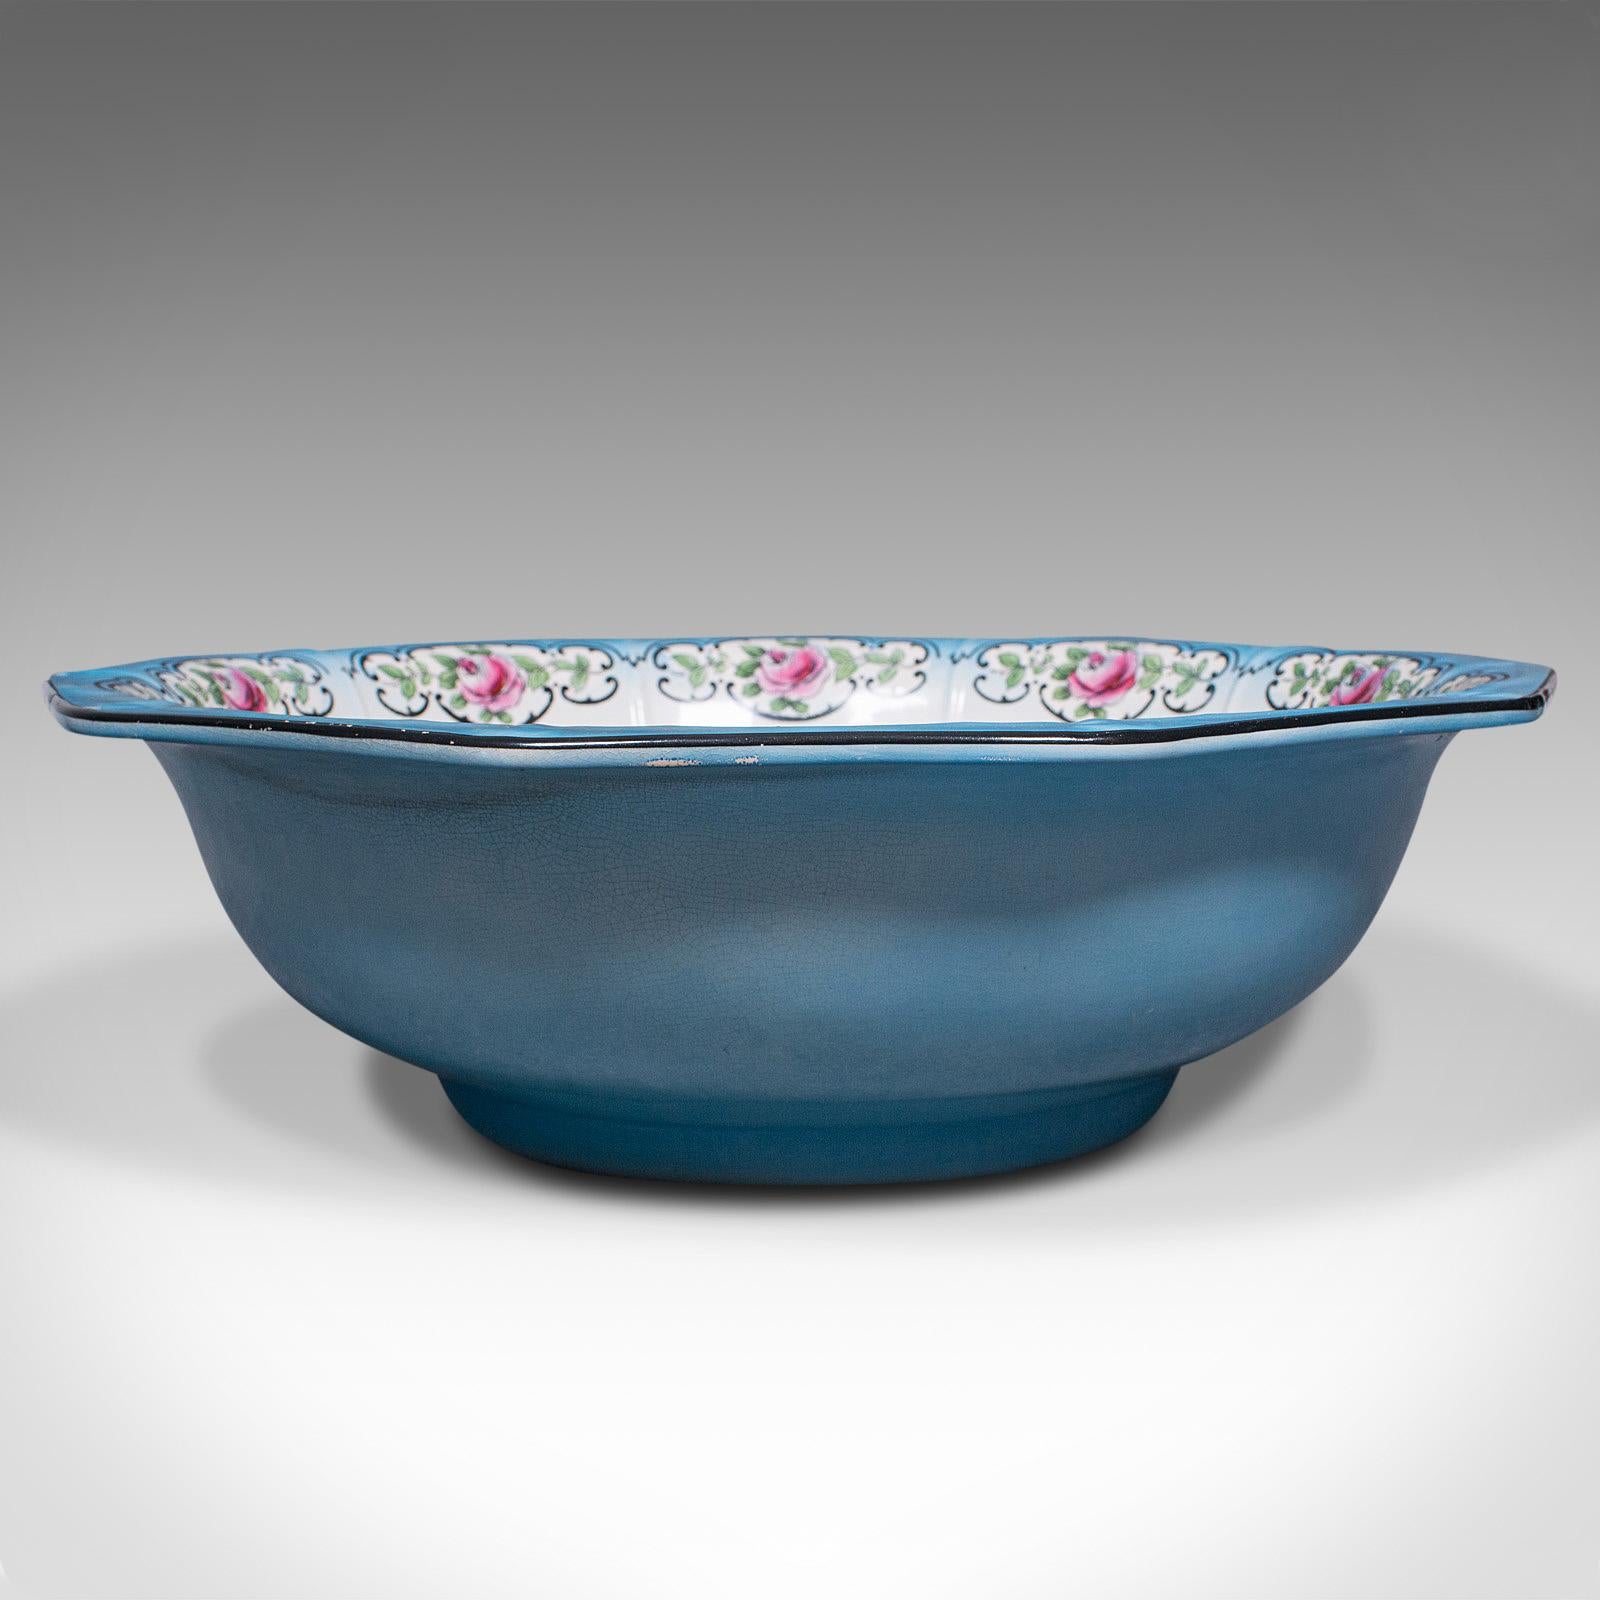 Large Vintage Serving Bowl, English, Ceramic, Fruit Dish, Mid 20th Century, 1930 In Good Condition For Sale In Hele, Devon, GB